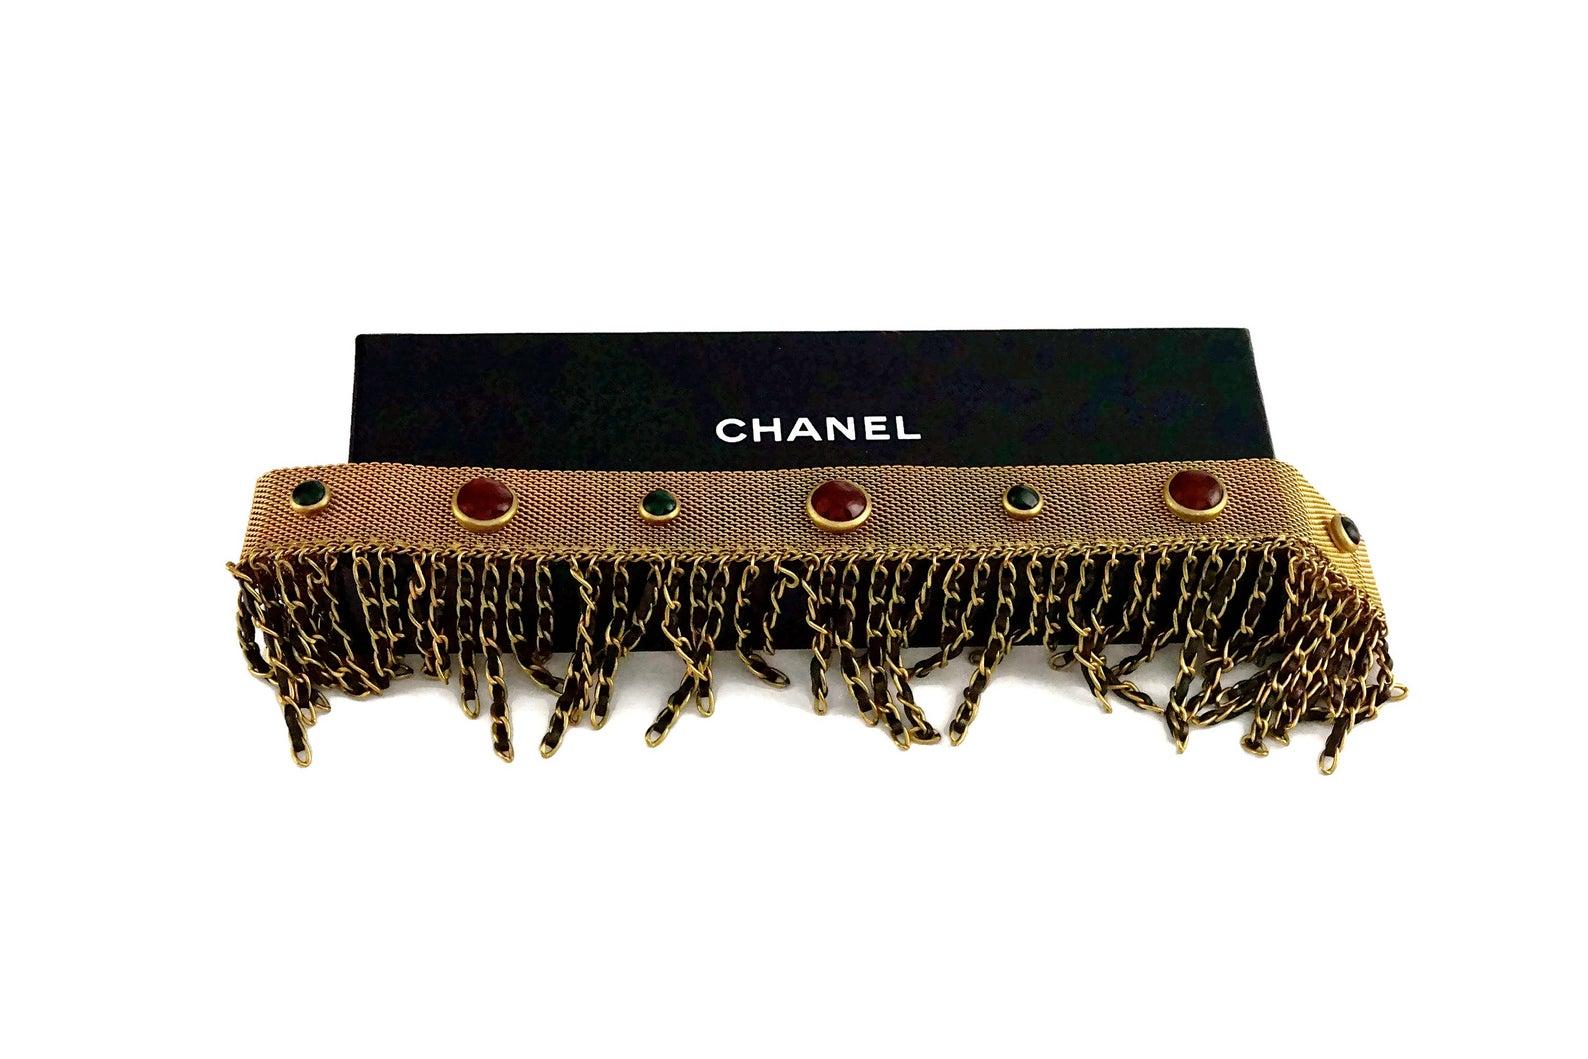 Features:
- 100% Authentic CHANEL from 1994 Autumn Collection.
- Mesh choker with Chanel's iconic red and green gripoix/ poured glass.
- Iconic leather chain fringes.
- Gold tone hardware.
- Snap button closure.
- Signed CHANEL 94 CC A Made in